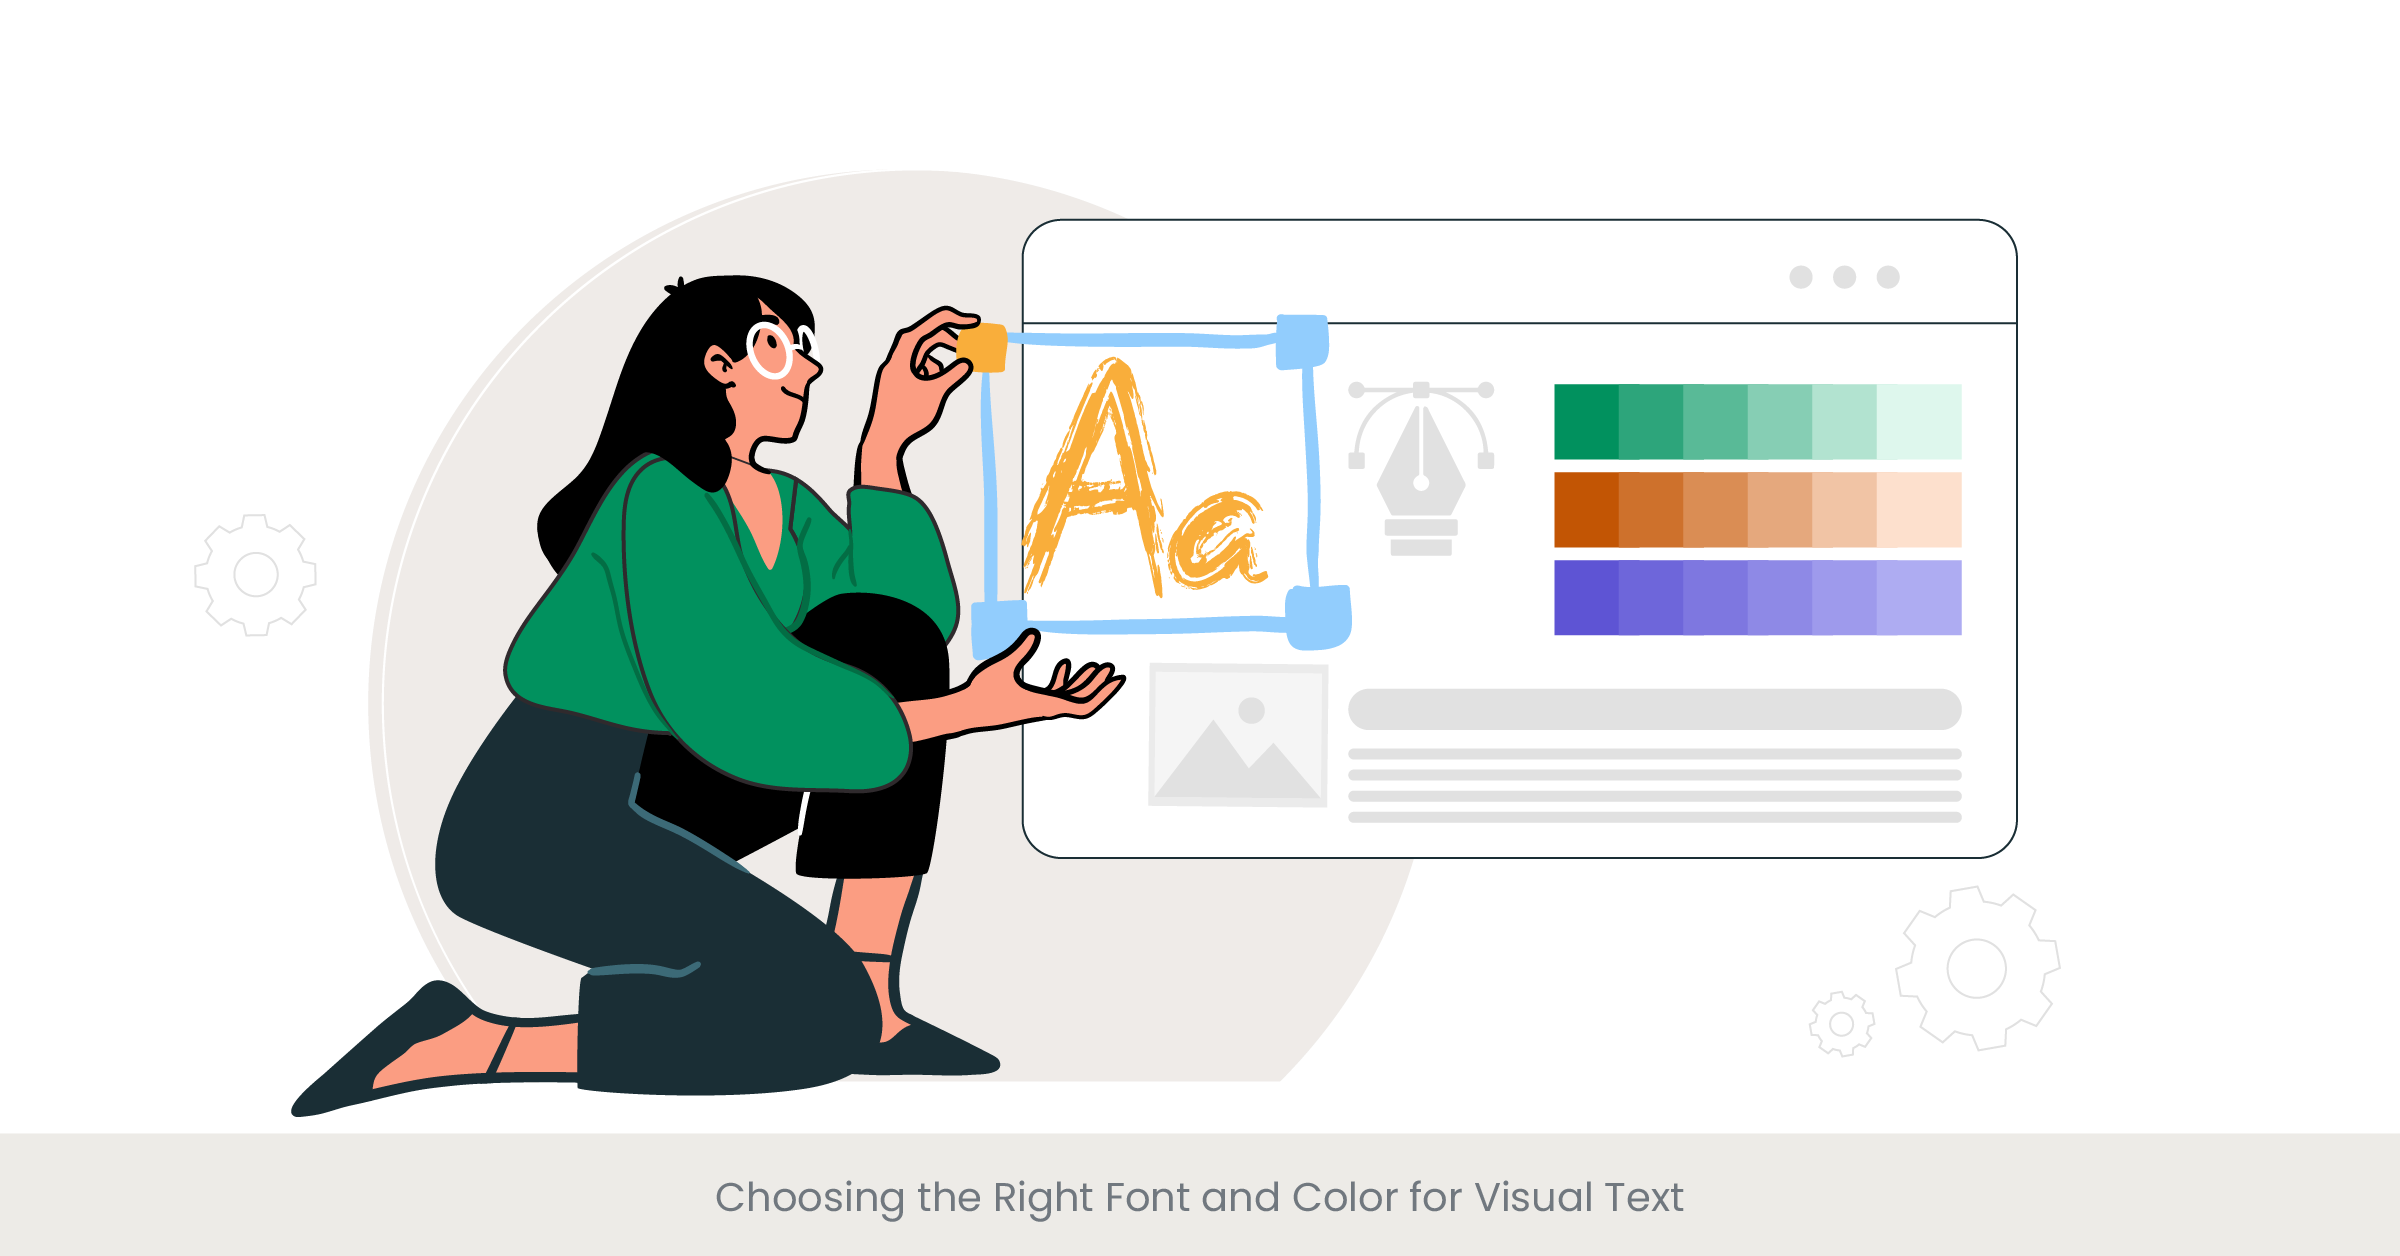 Choosing the Right Font and Color for Visual Text